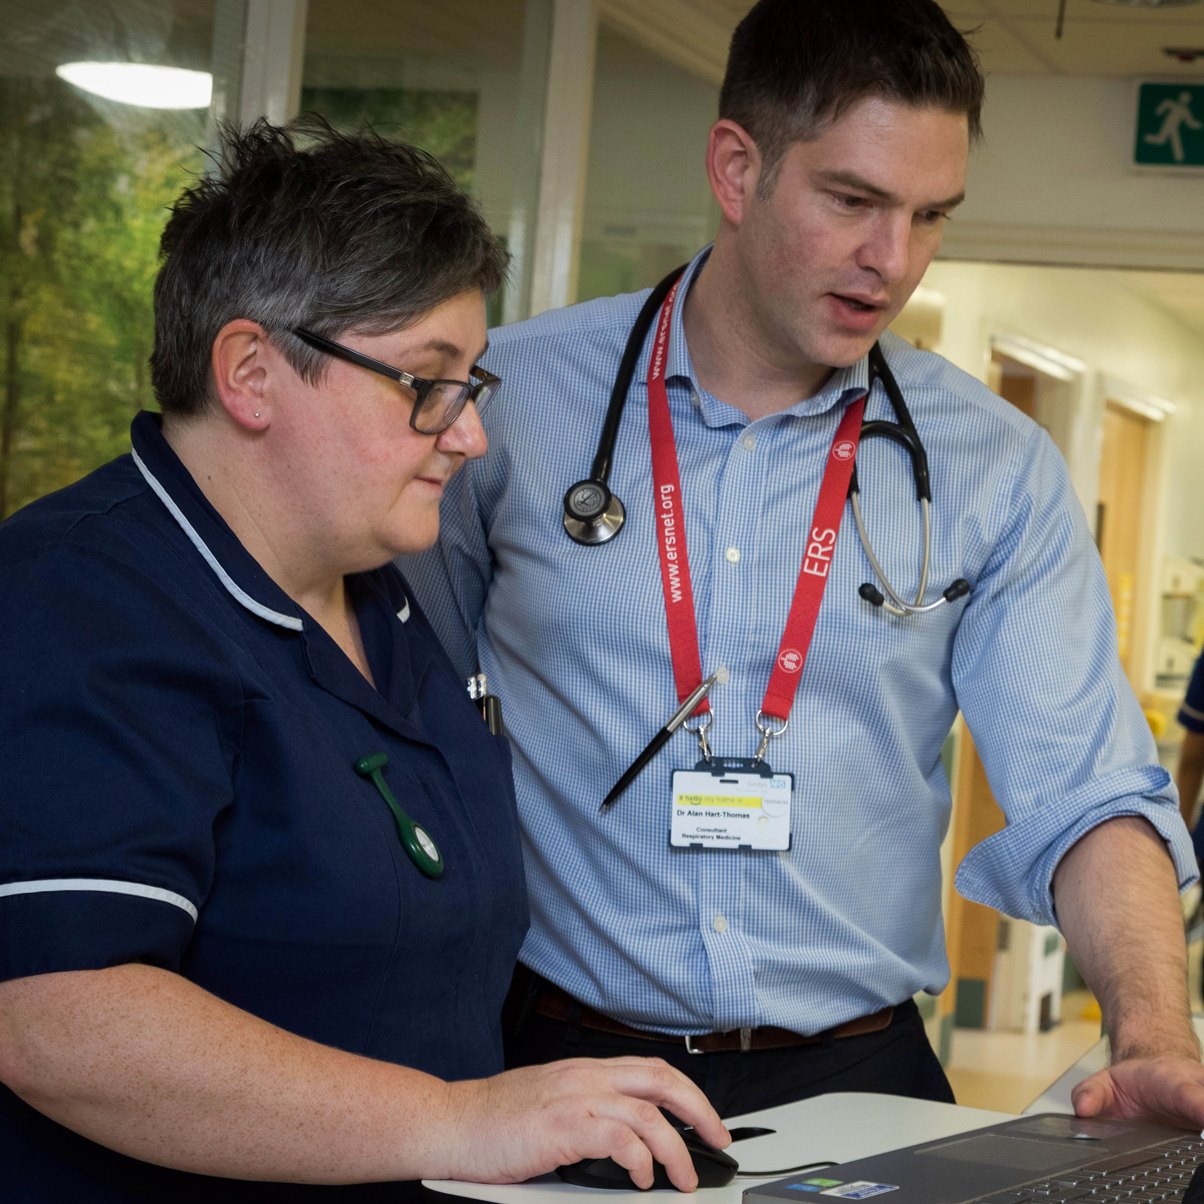 West Yorkshire Association of Acute Trusts: hospitals working together